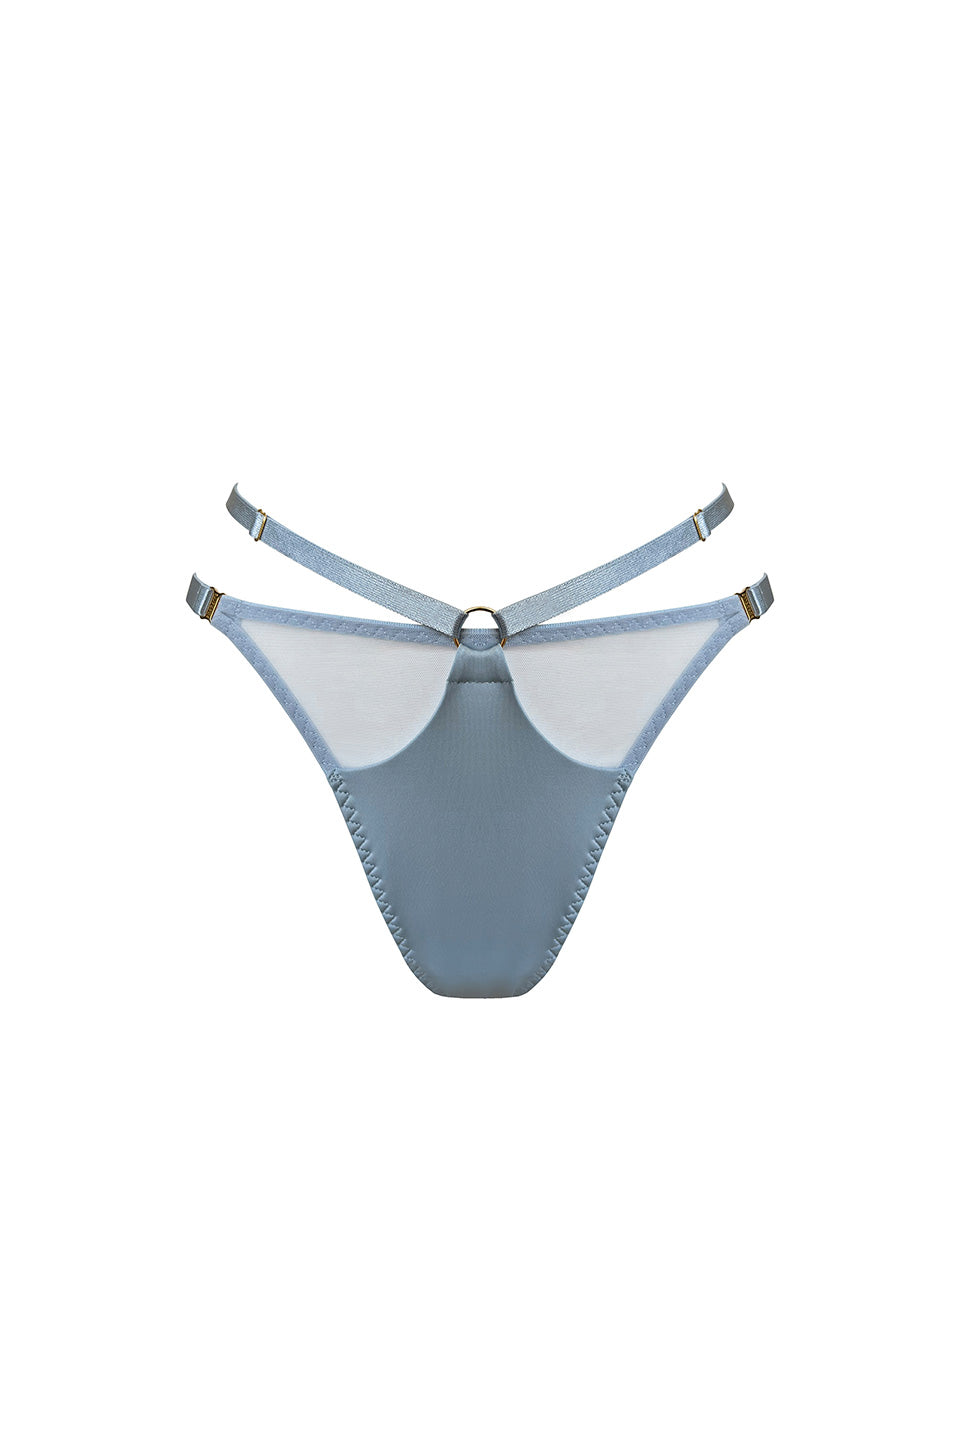 Shop online trendy Blue Undergarments from Bordelle Fashion designer. Product gallery 1